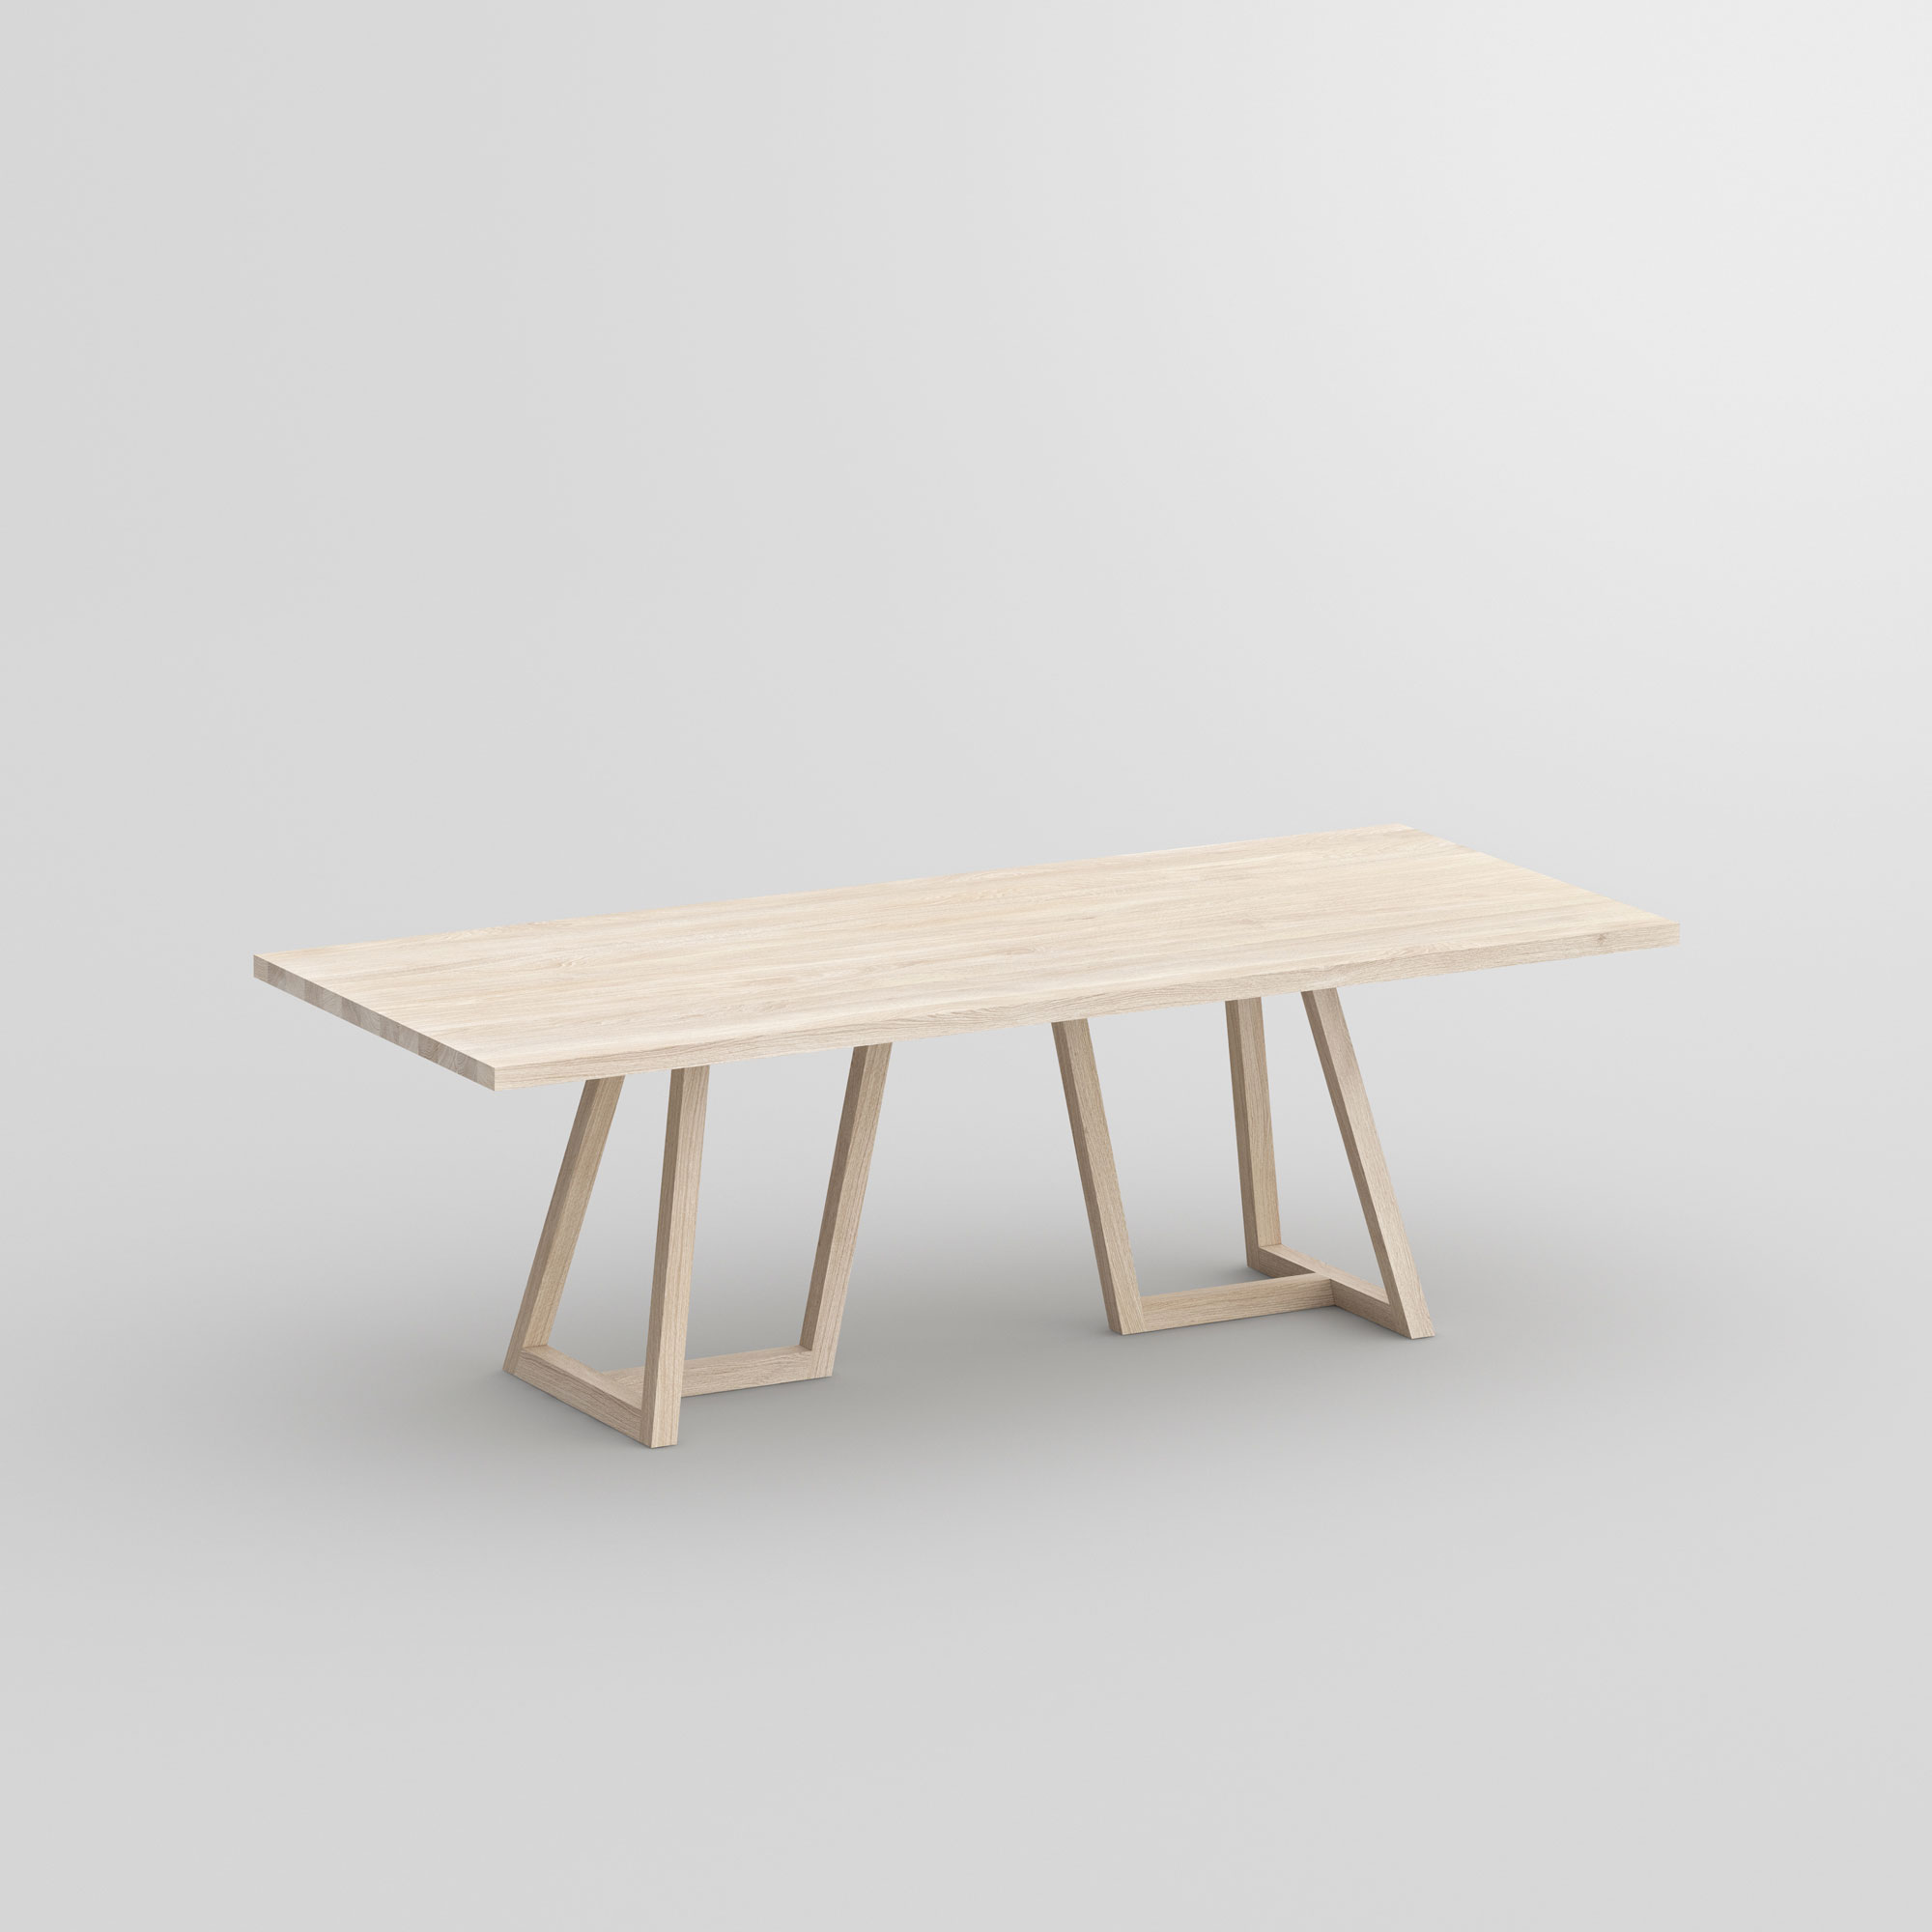 Designer Solid Wood Table MARGO cam1 custom made in solid wood by vitamin design